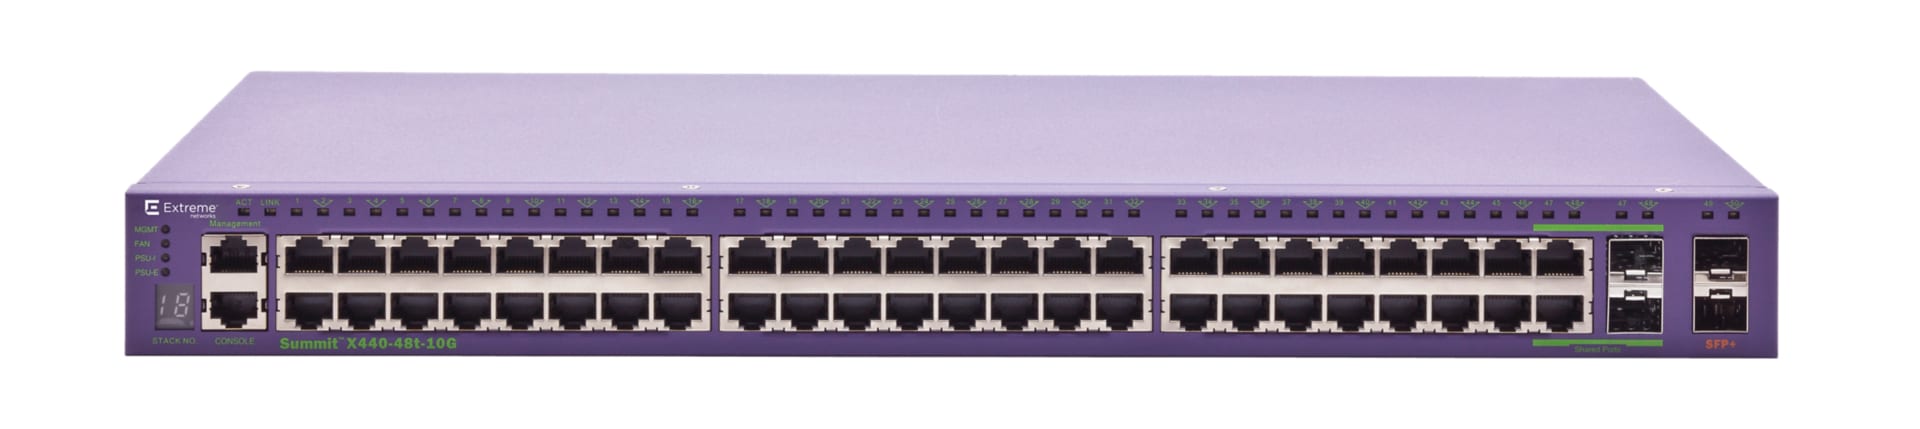 Extreme Networks ExtremeSwitching X440-G2 X440-G2-48t-10GE4 - switch - 48 p